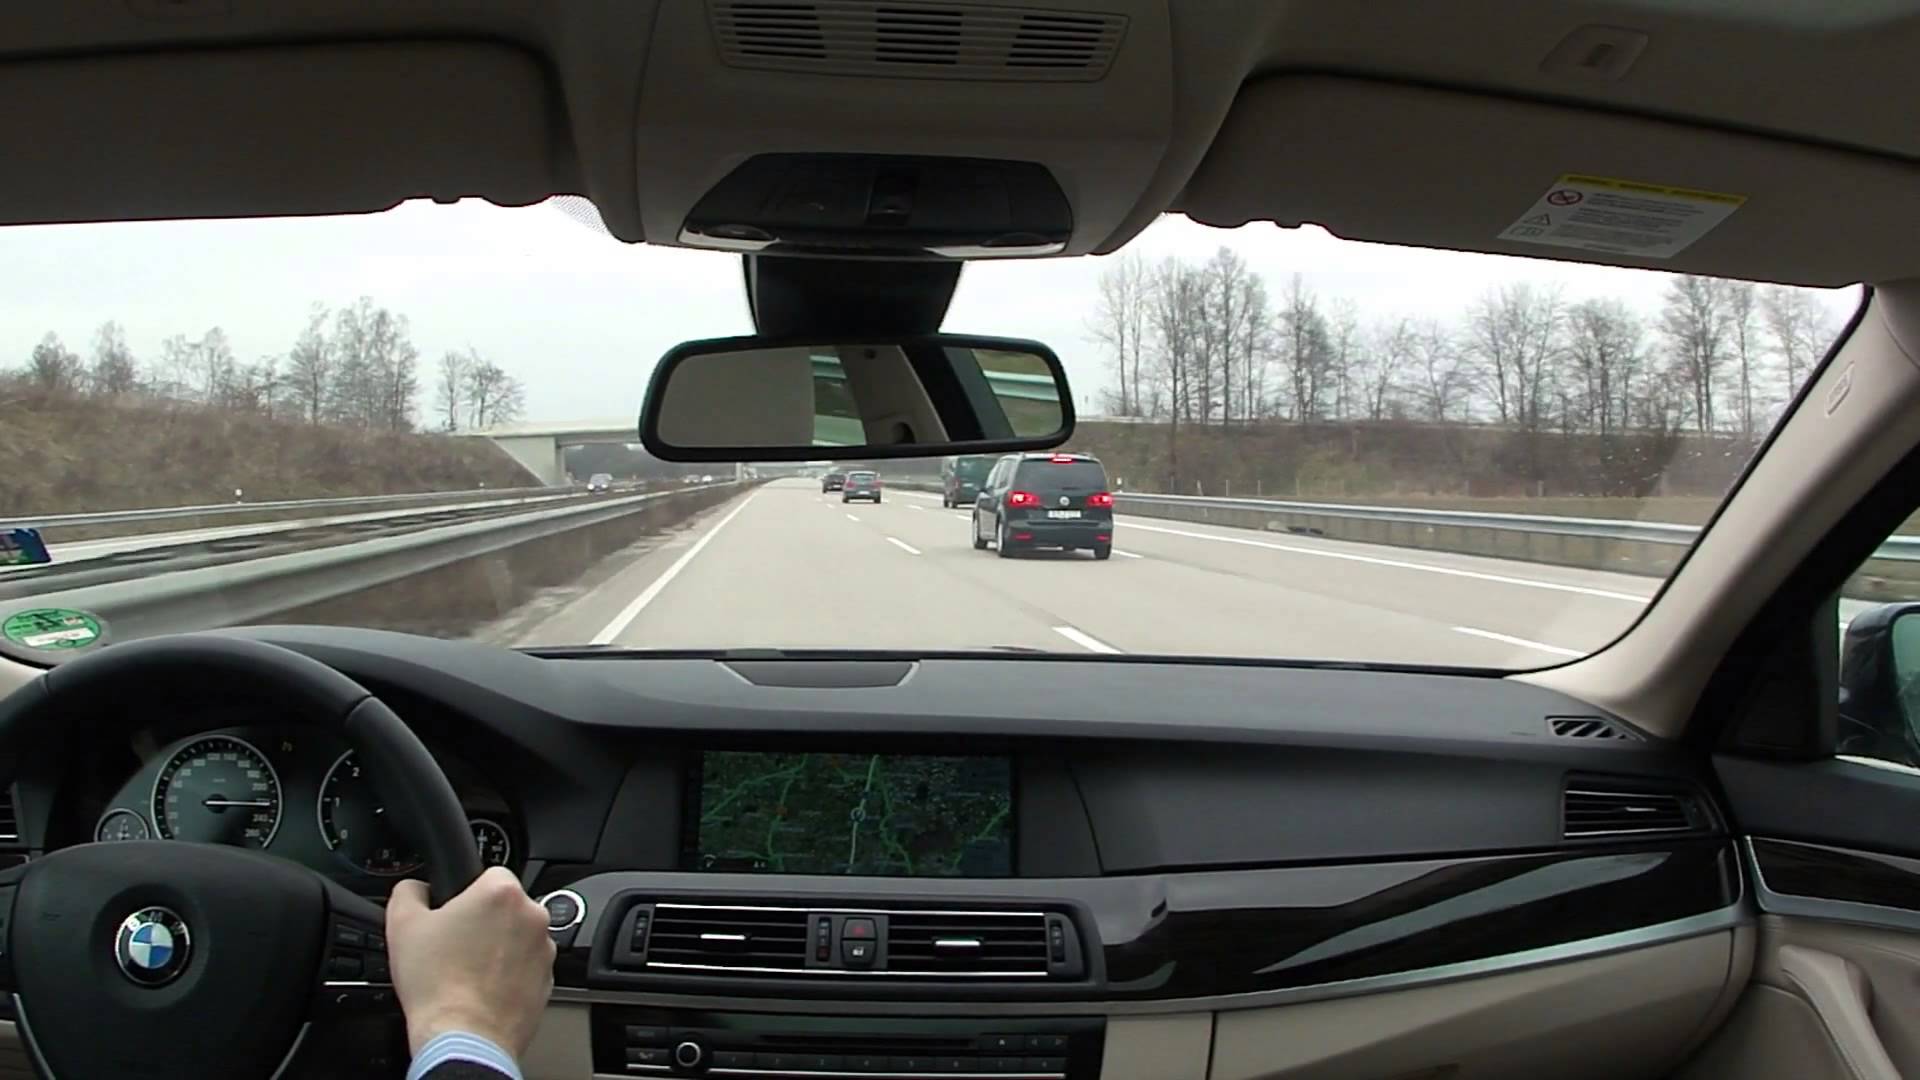 The co-drivers view: driving fast on the Autobahn - YouTube